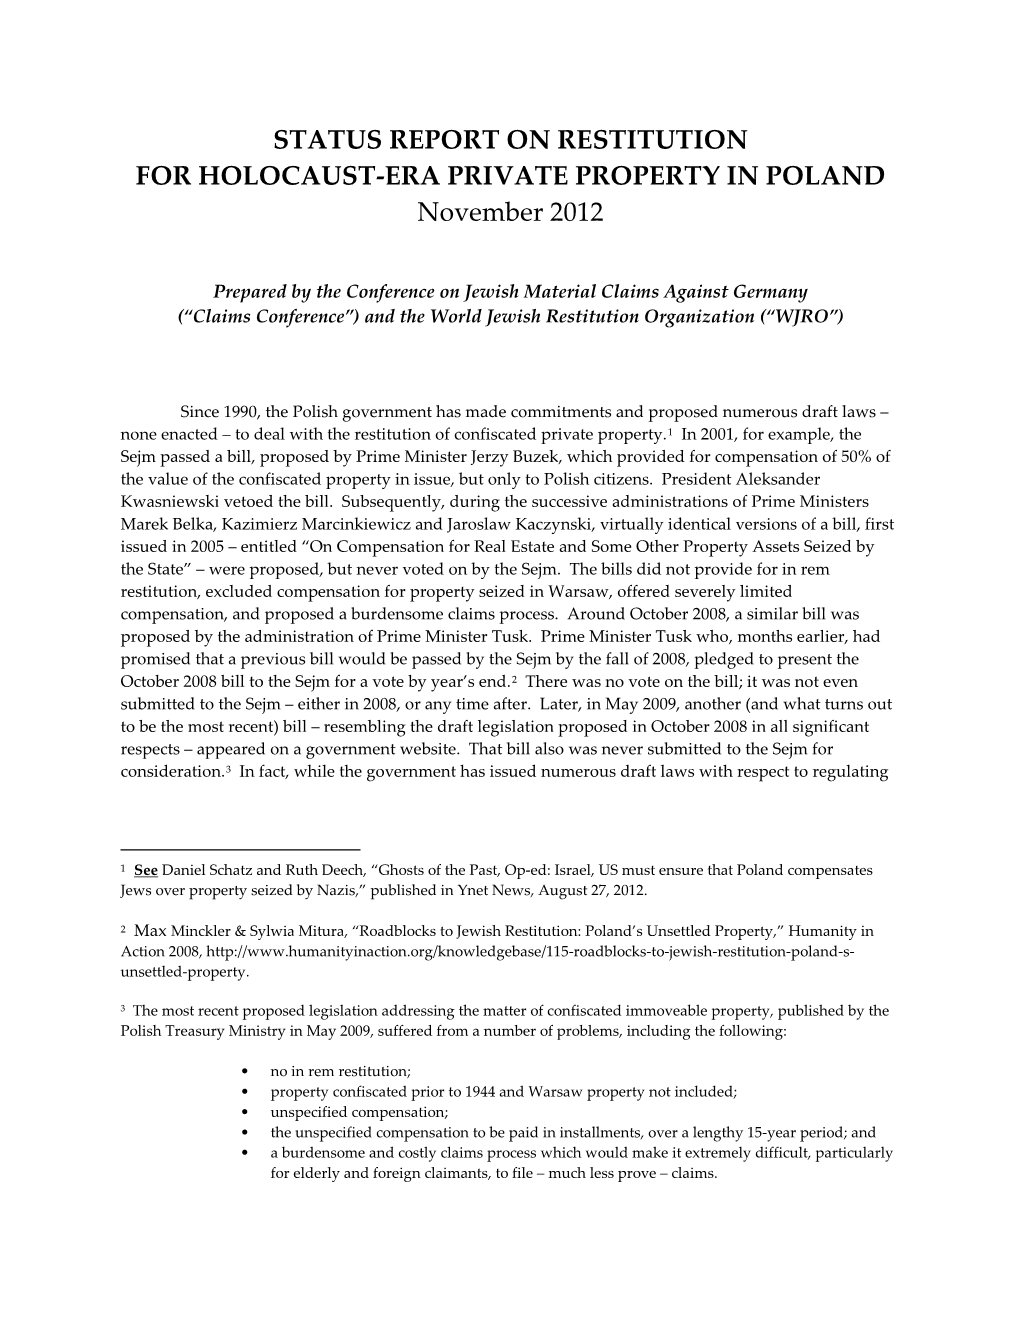 STATUS REPORT on RESTITUTION for HOLOCAUST-ERA PRIVATE PROPERTY in POLAND November 2012